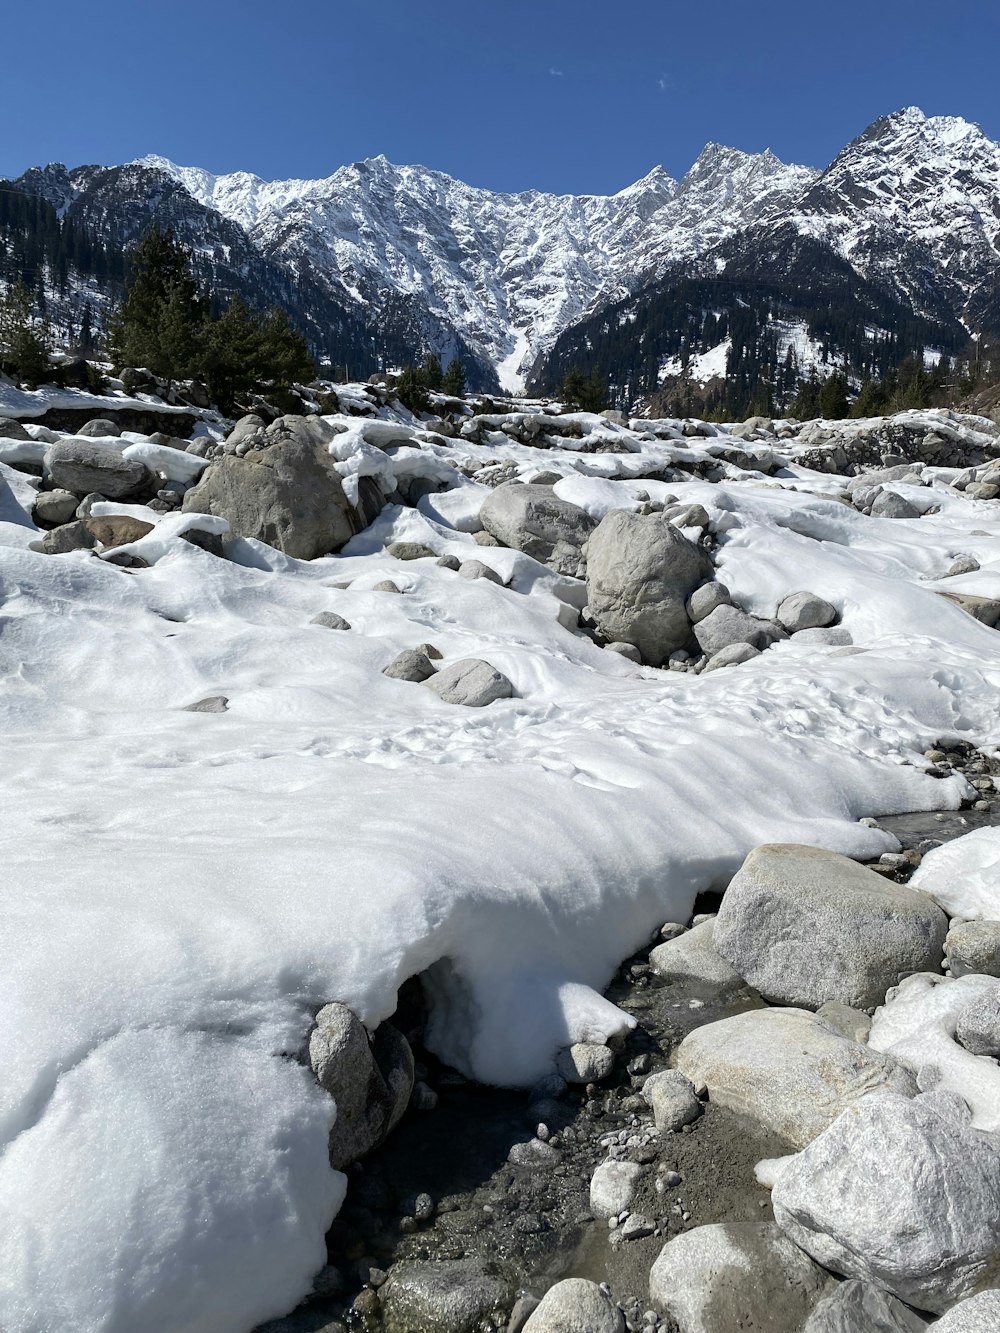 a rocky area with snow and mountains in the background